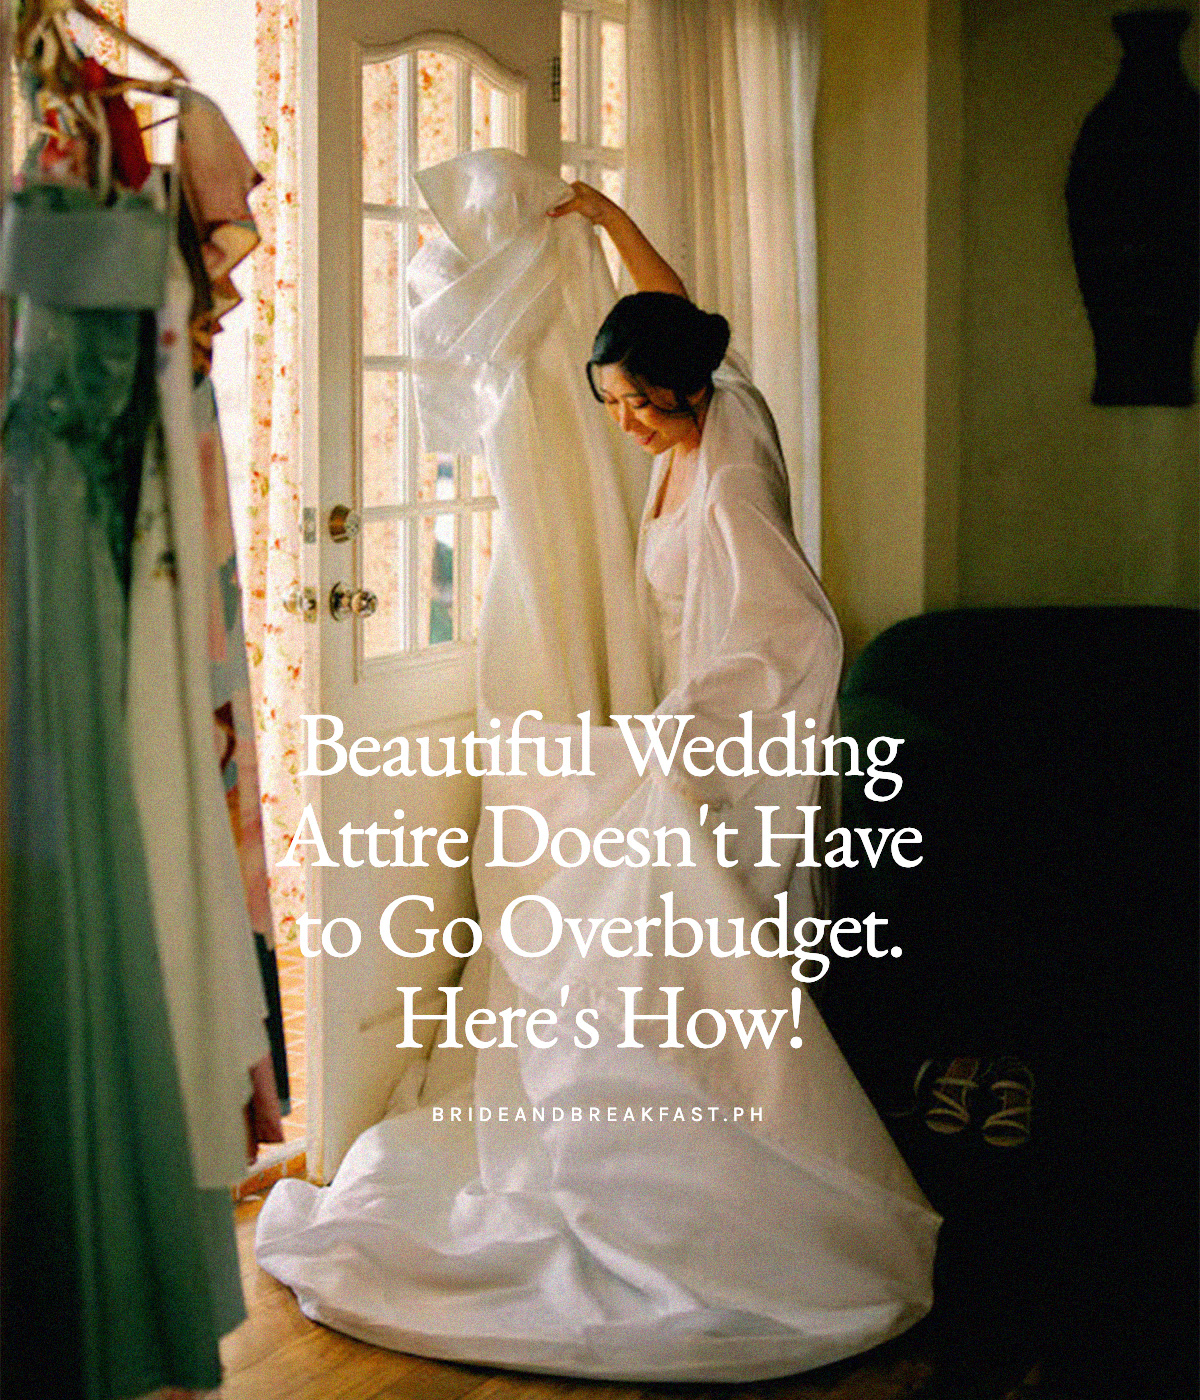 Beautiful Wedding Attire Doesn't Have to Go Overbudget. Here's How 